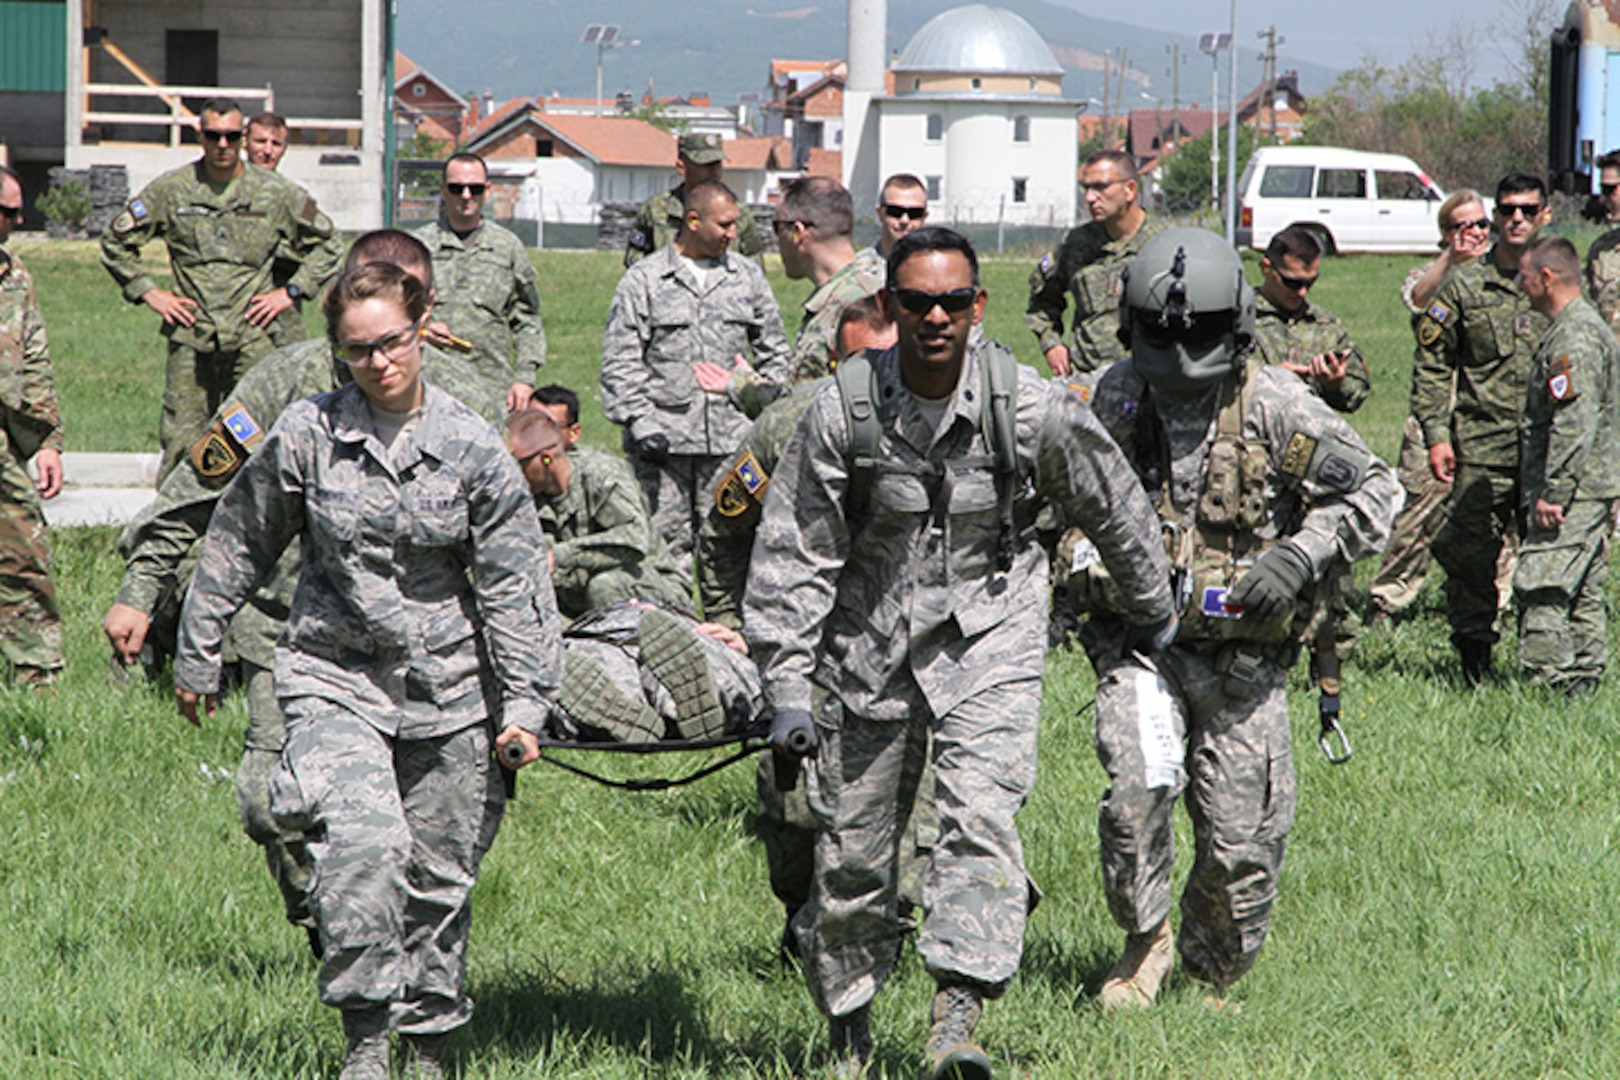 Air National Guard Staff Sgt. Jennifer Simmons 132nd Wing, and Lt. Col. Emile Fernando 185th Air Refueling Wing, both of the Iowa Air National Guard, carry a patient to a helicopter during a medevac training exercise near Pristina, Kosovo, on May 2, 2018. Airmen from the Iowa Guard are in Kosovo participating in a two week exercise held annually as part of the state partner program with Iowa and Kosovo.